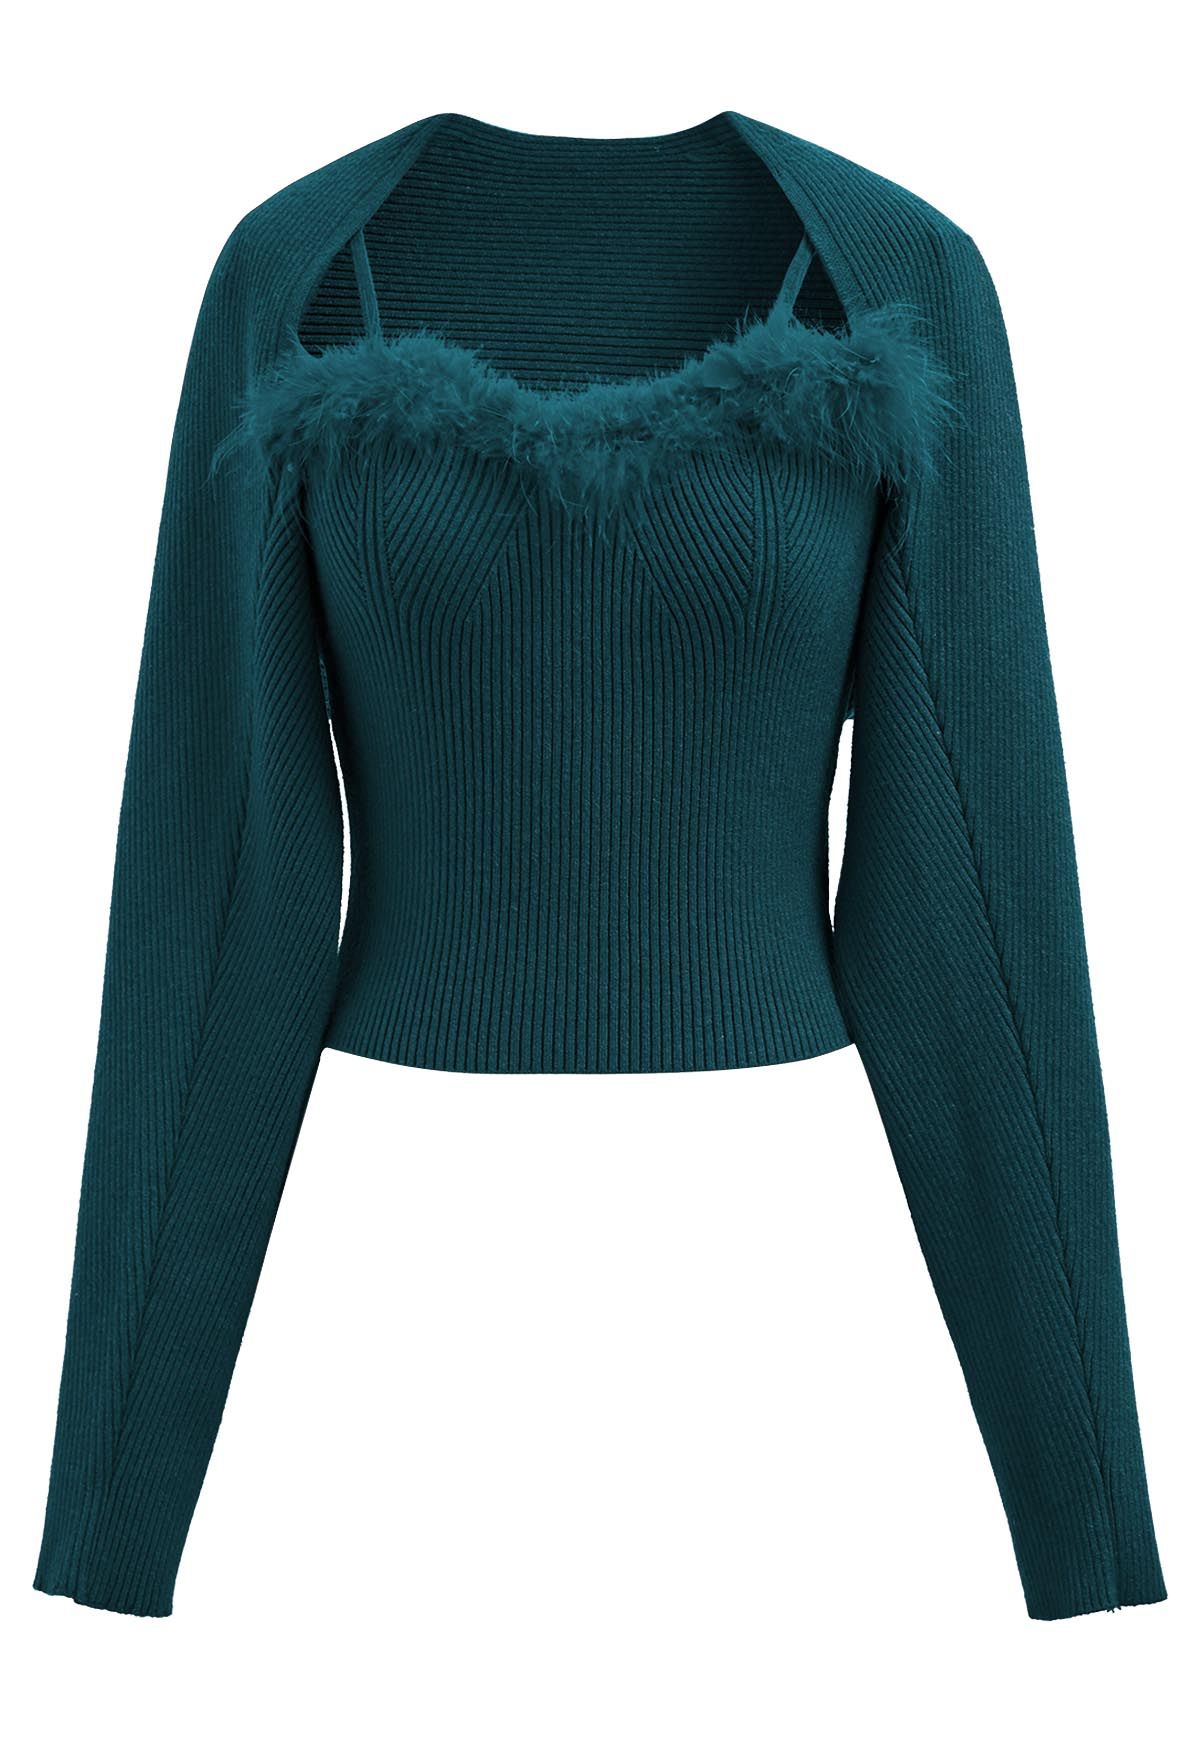 Feather Trim Cami Top and Sweater Sleeve Set in Teal